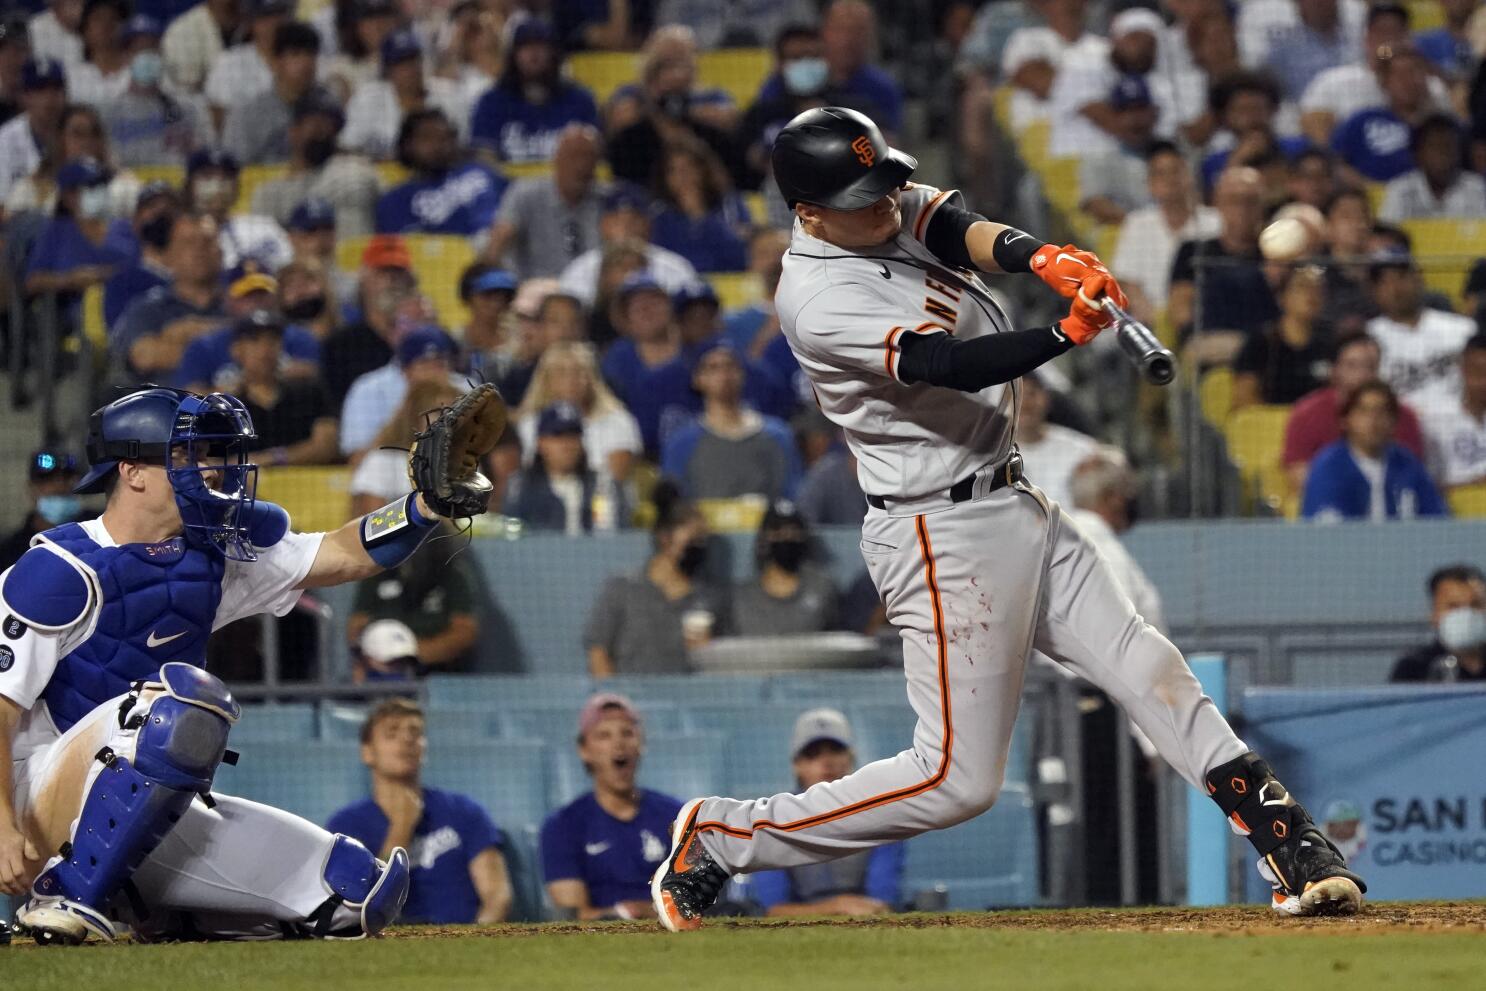 Kenley Jansen blows another save as Giants rally to beat Dodgers